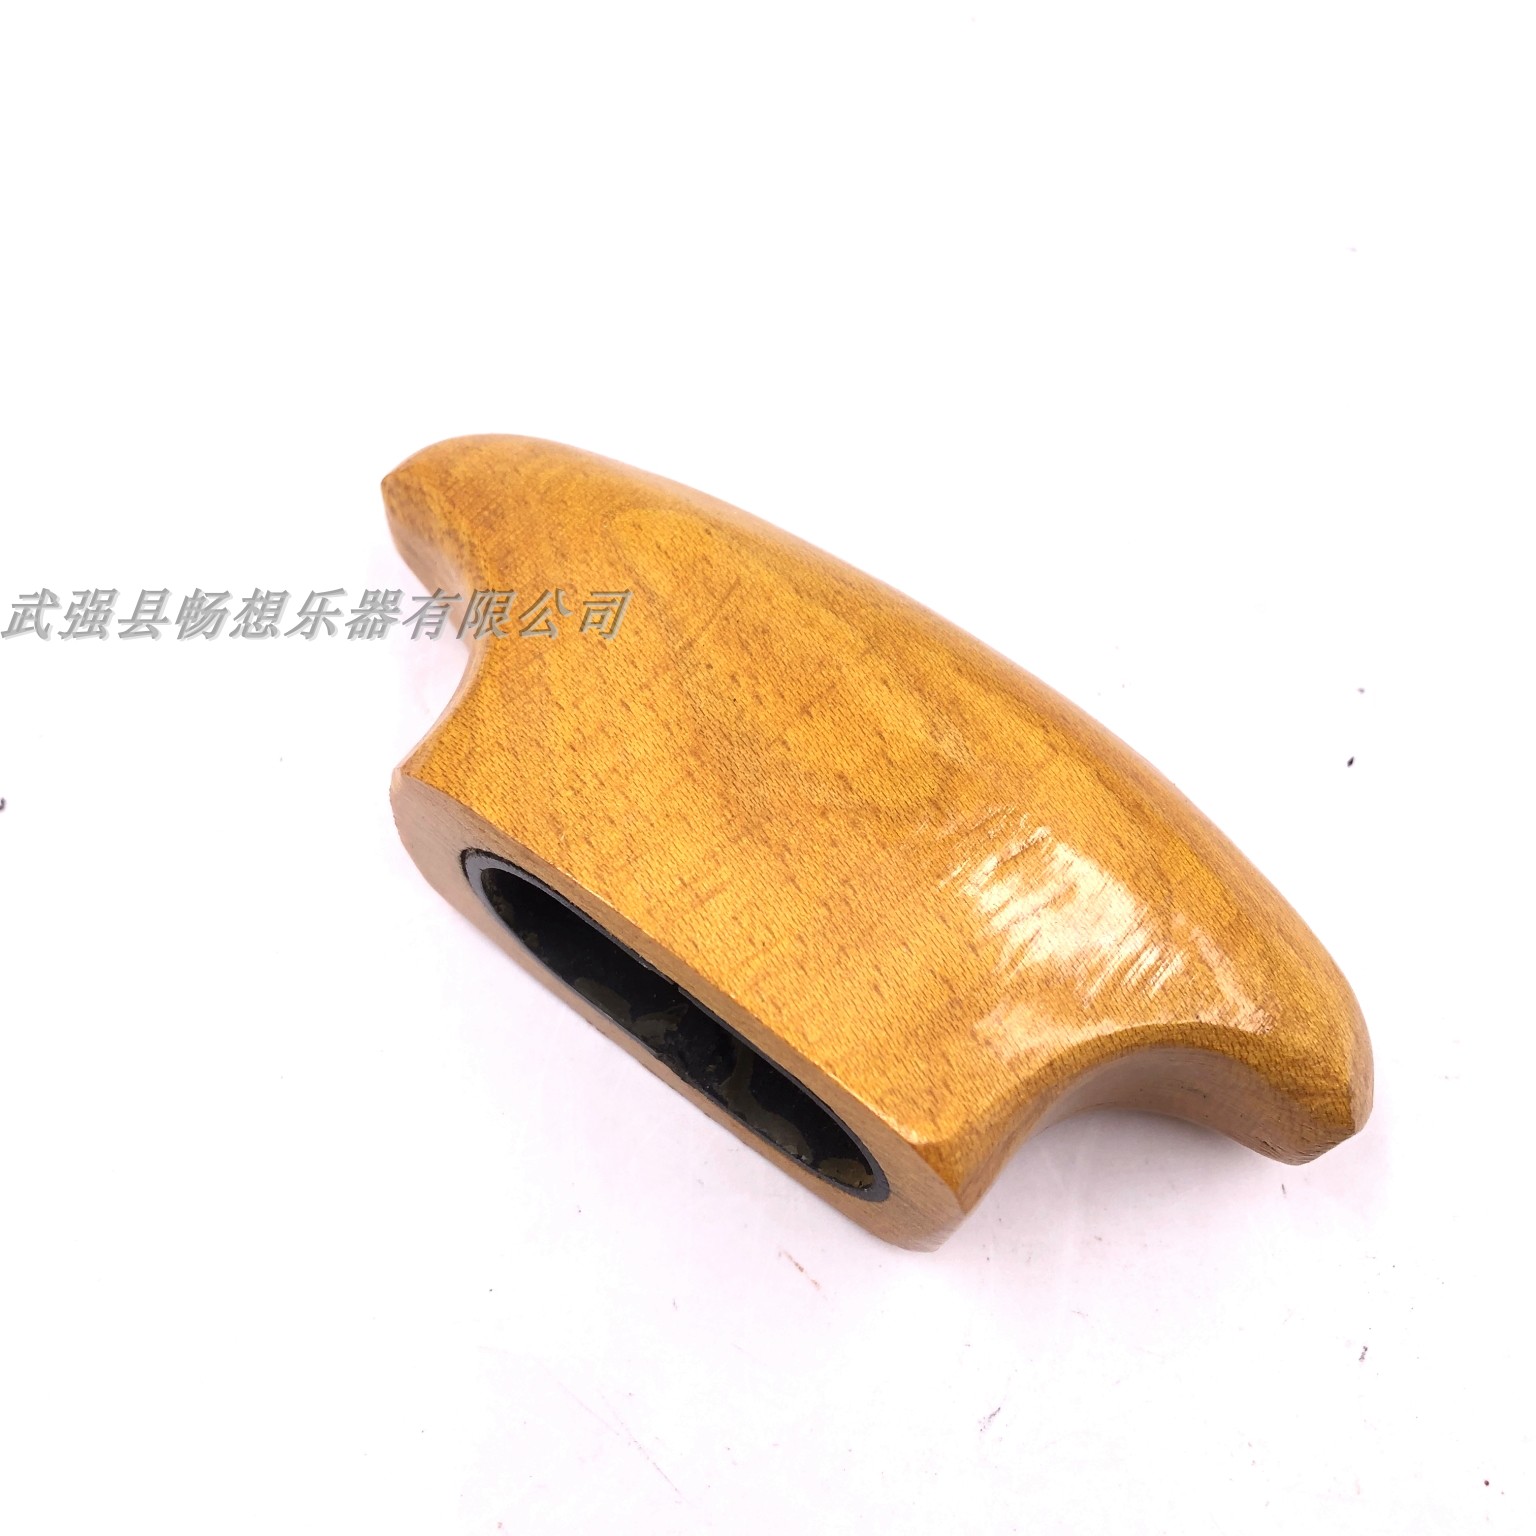 Solid Wood Maple cello string tightening auxiliary tool handle hinge auxiliary tool violin tool